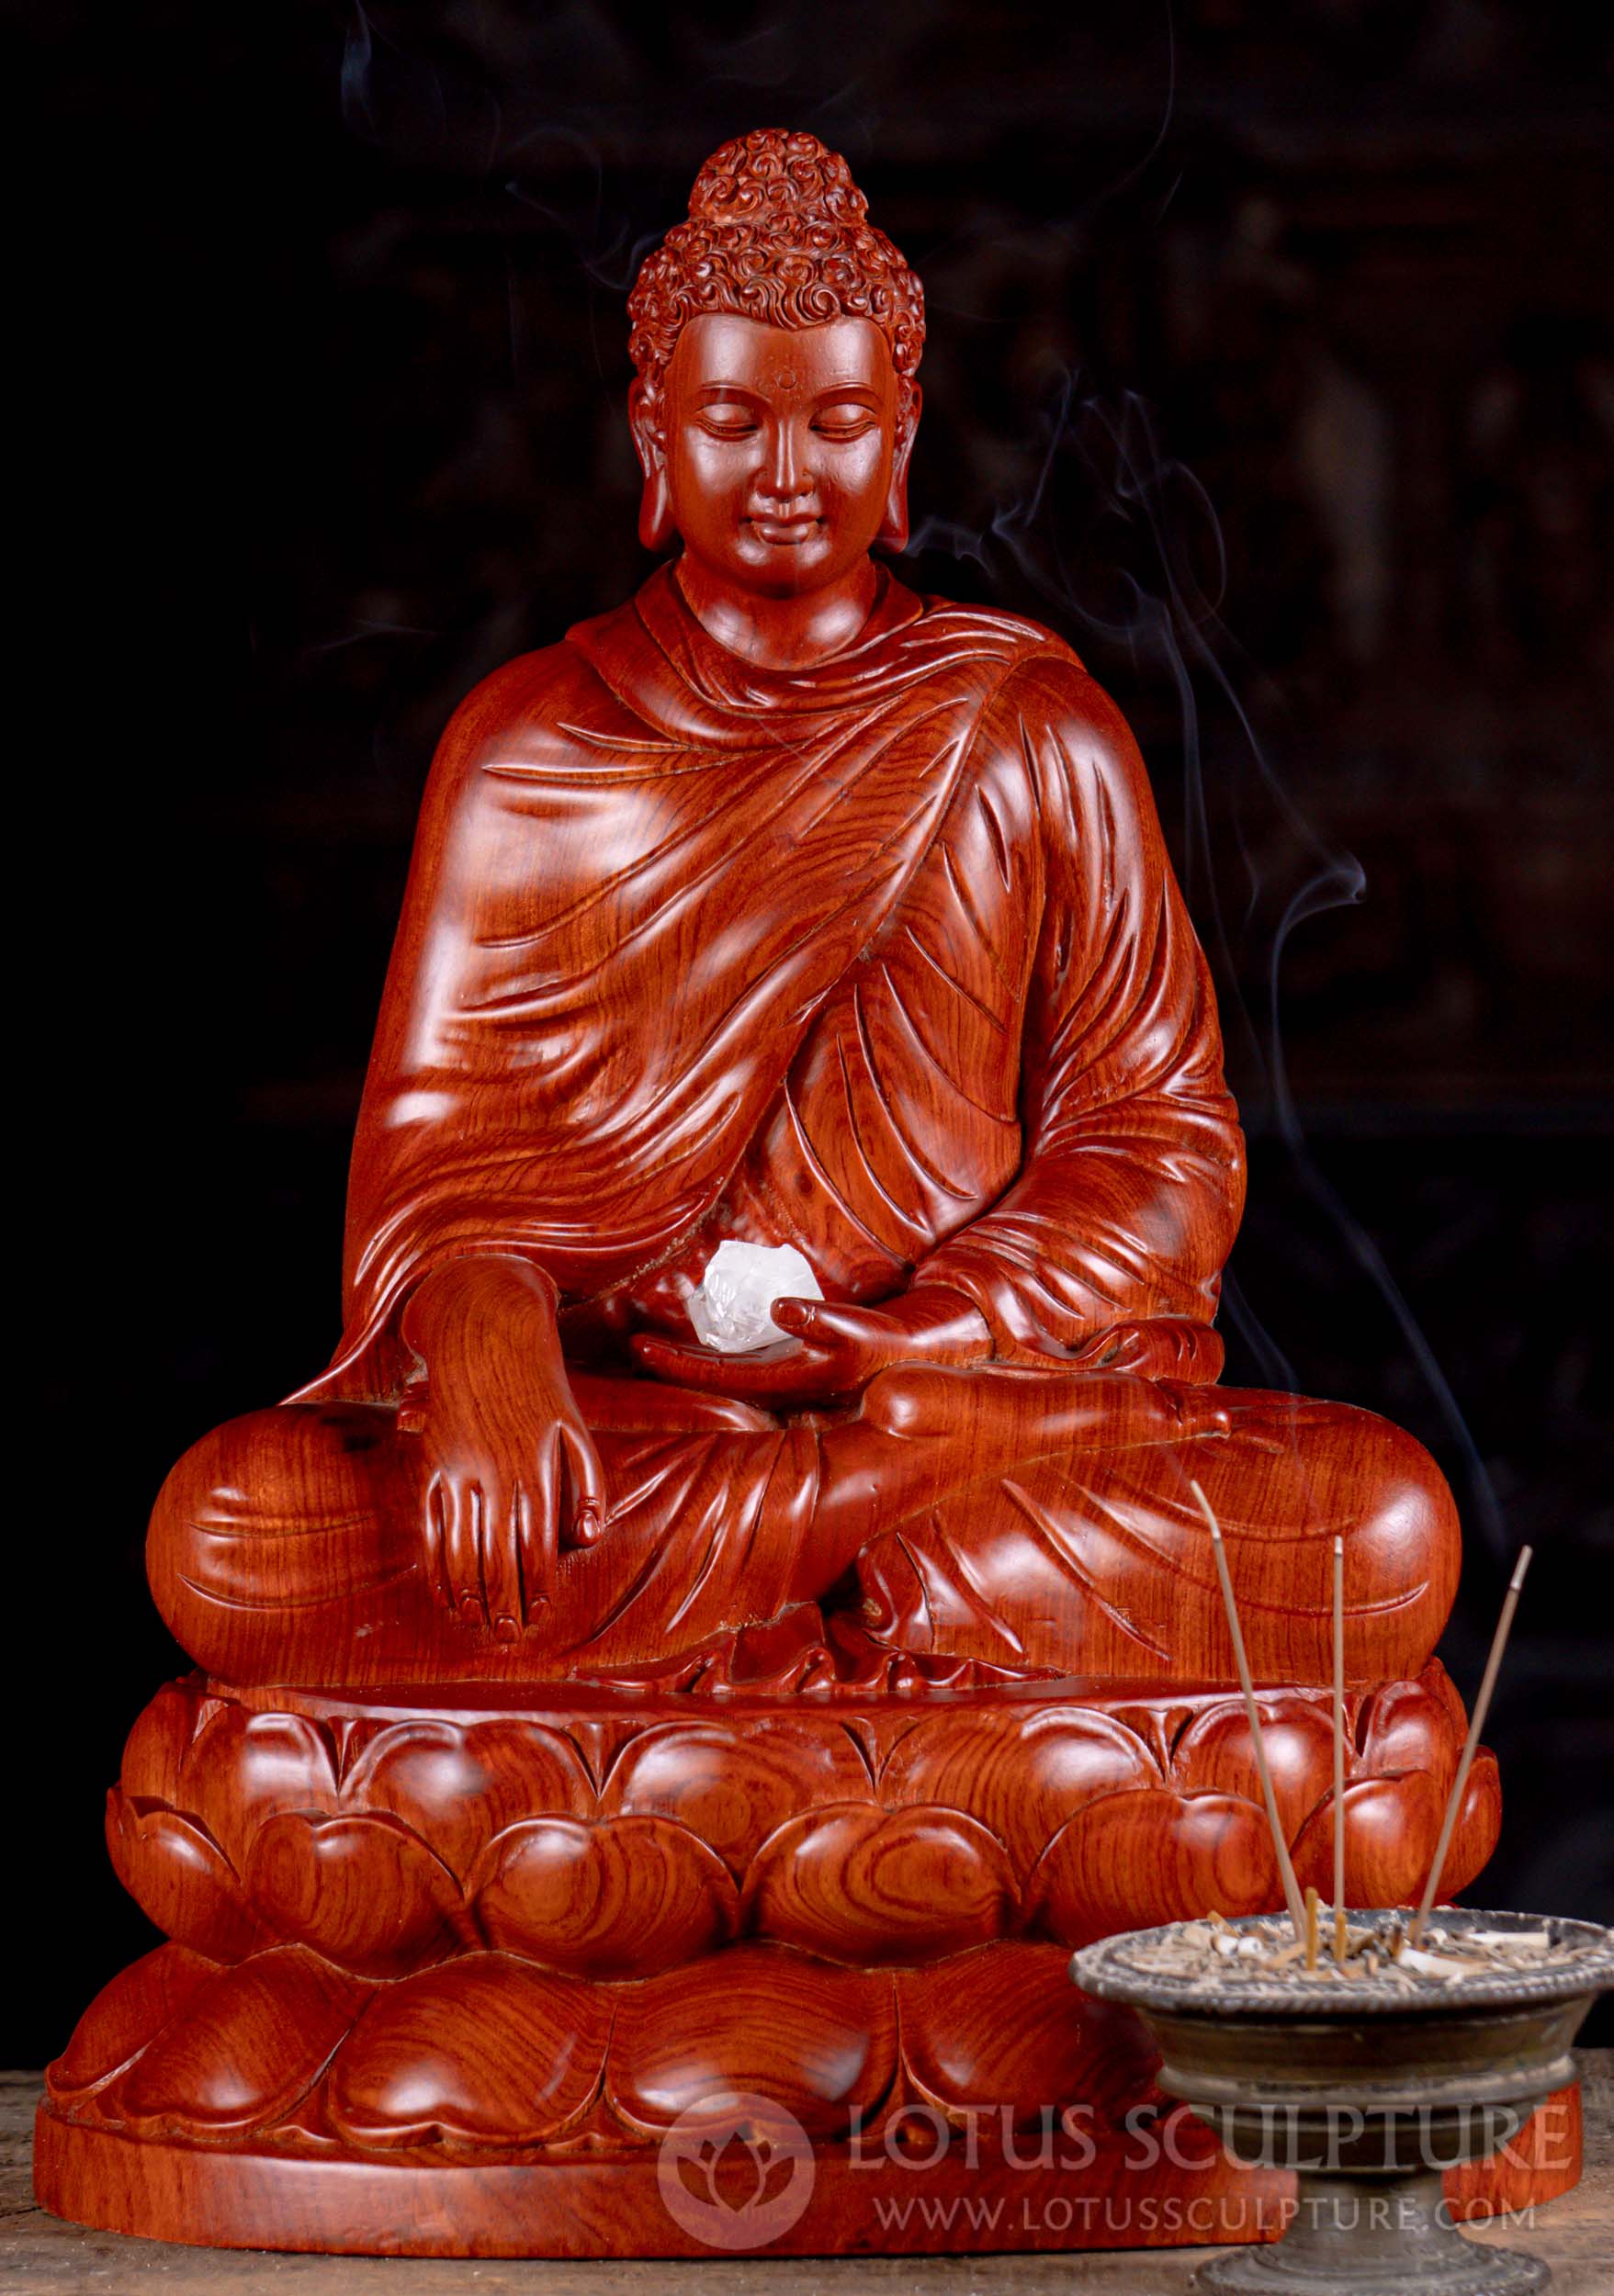 Buy Buddha statues for sale from online Buddha statues gallery